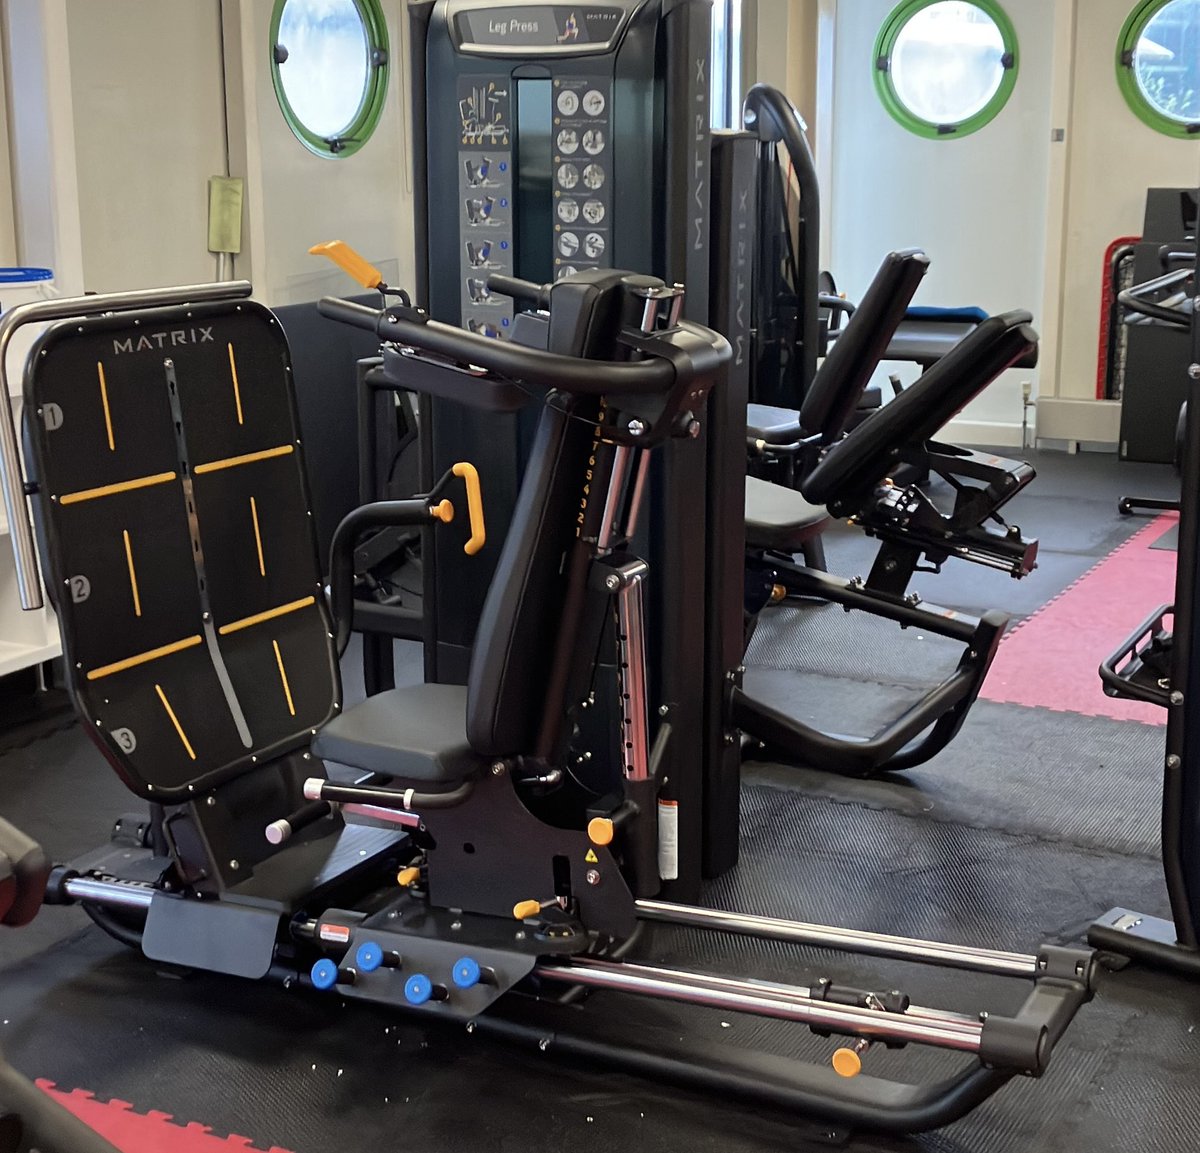 It’s hard not to work in rehab as a personal trainer because there will always be niggles, soreness and injuries we need to plan and adapt for. The Matrix medical leg press is great asset to have. @msffitness #SHROPSHIRE #personaltrainer #rehabilitation #Telford #sportsmassage